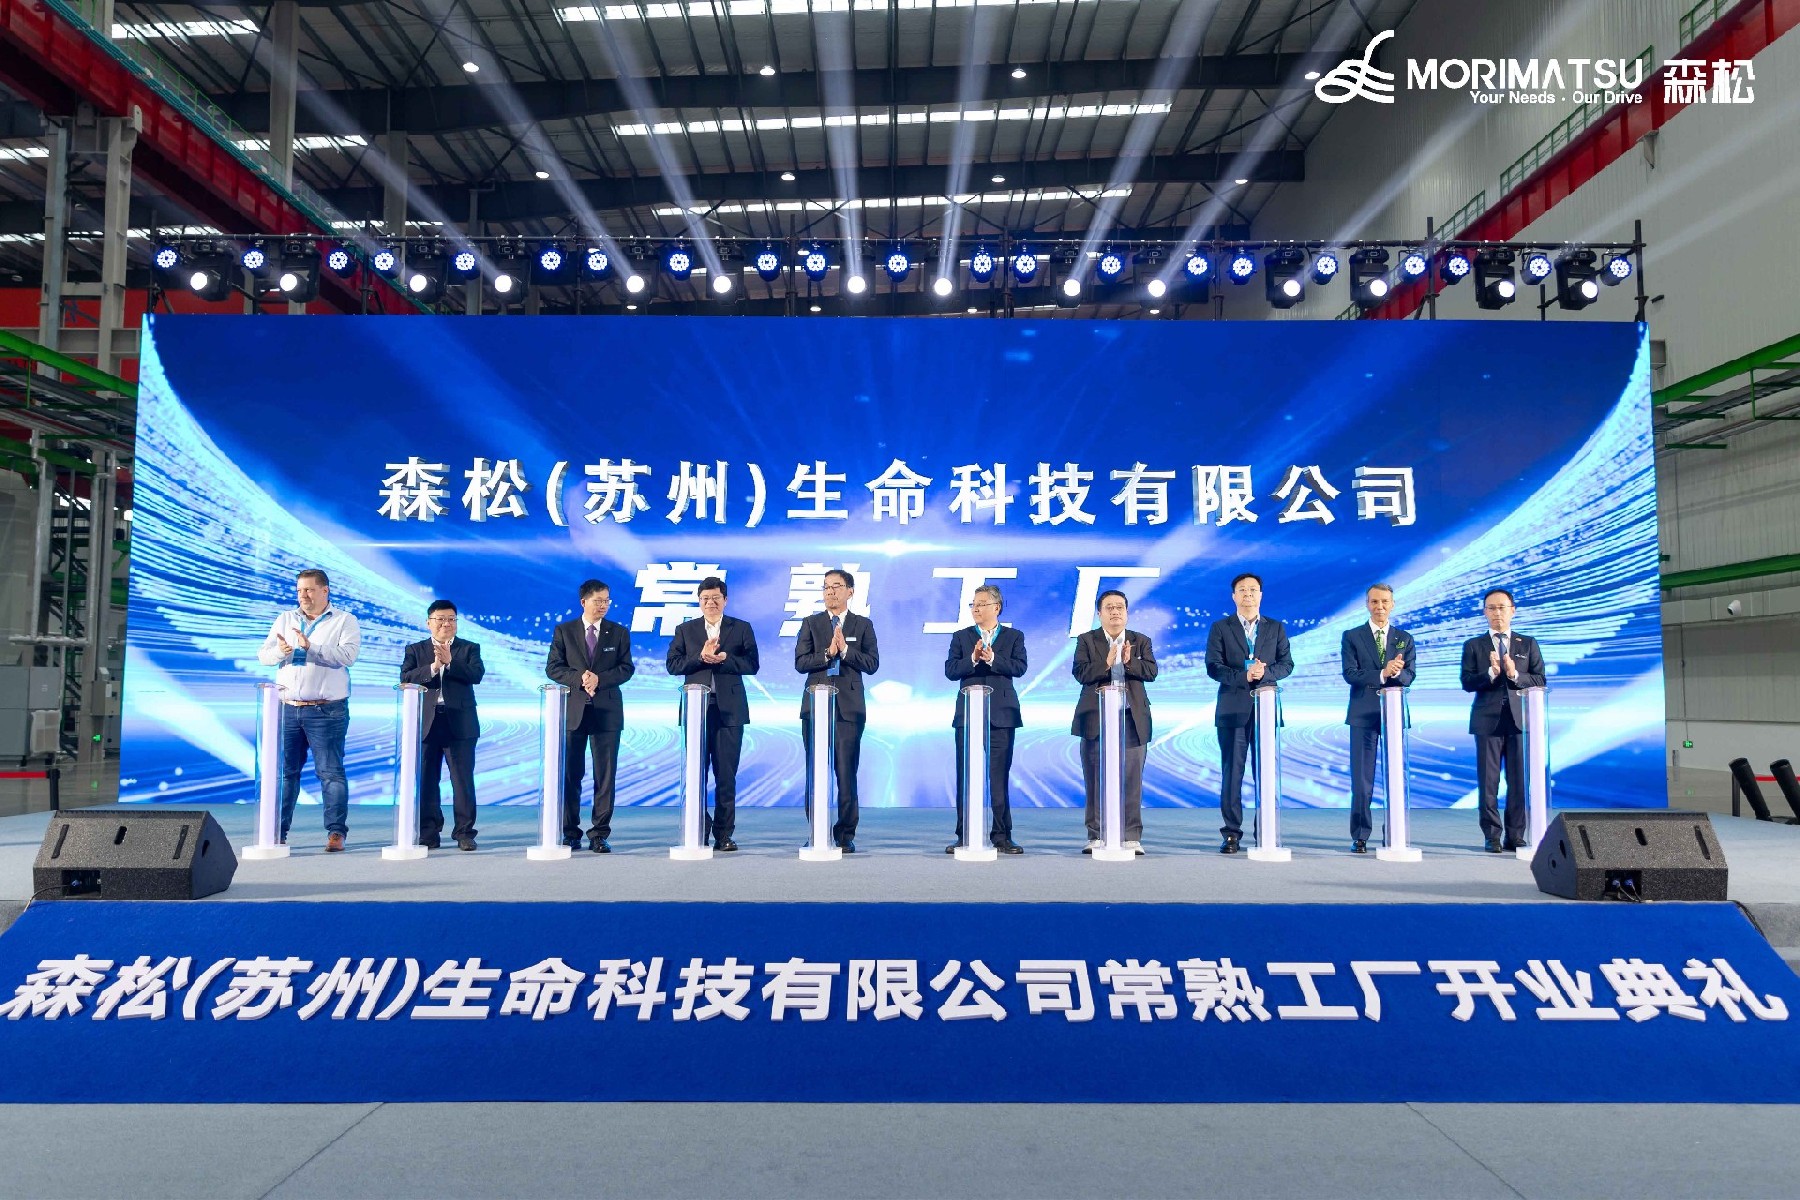 The opening ceremony of Morimatsu Suzhou (Changshu) Production Base was successfully held